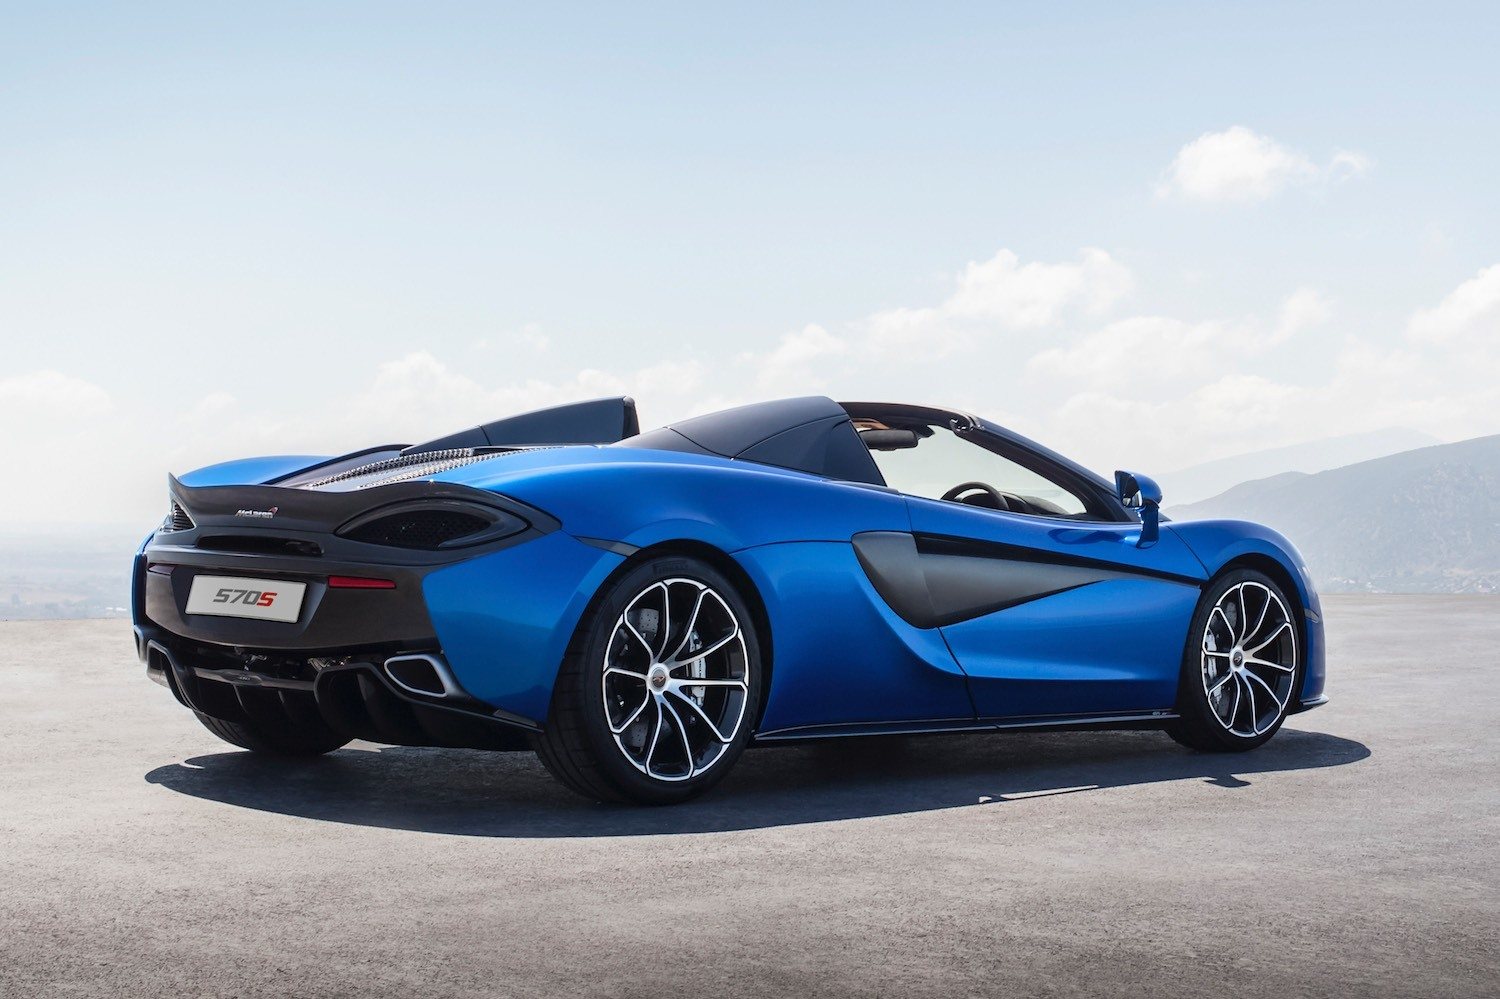 Neil Lyndon reviews the latest New McLaren 720S Spider for Drive 2